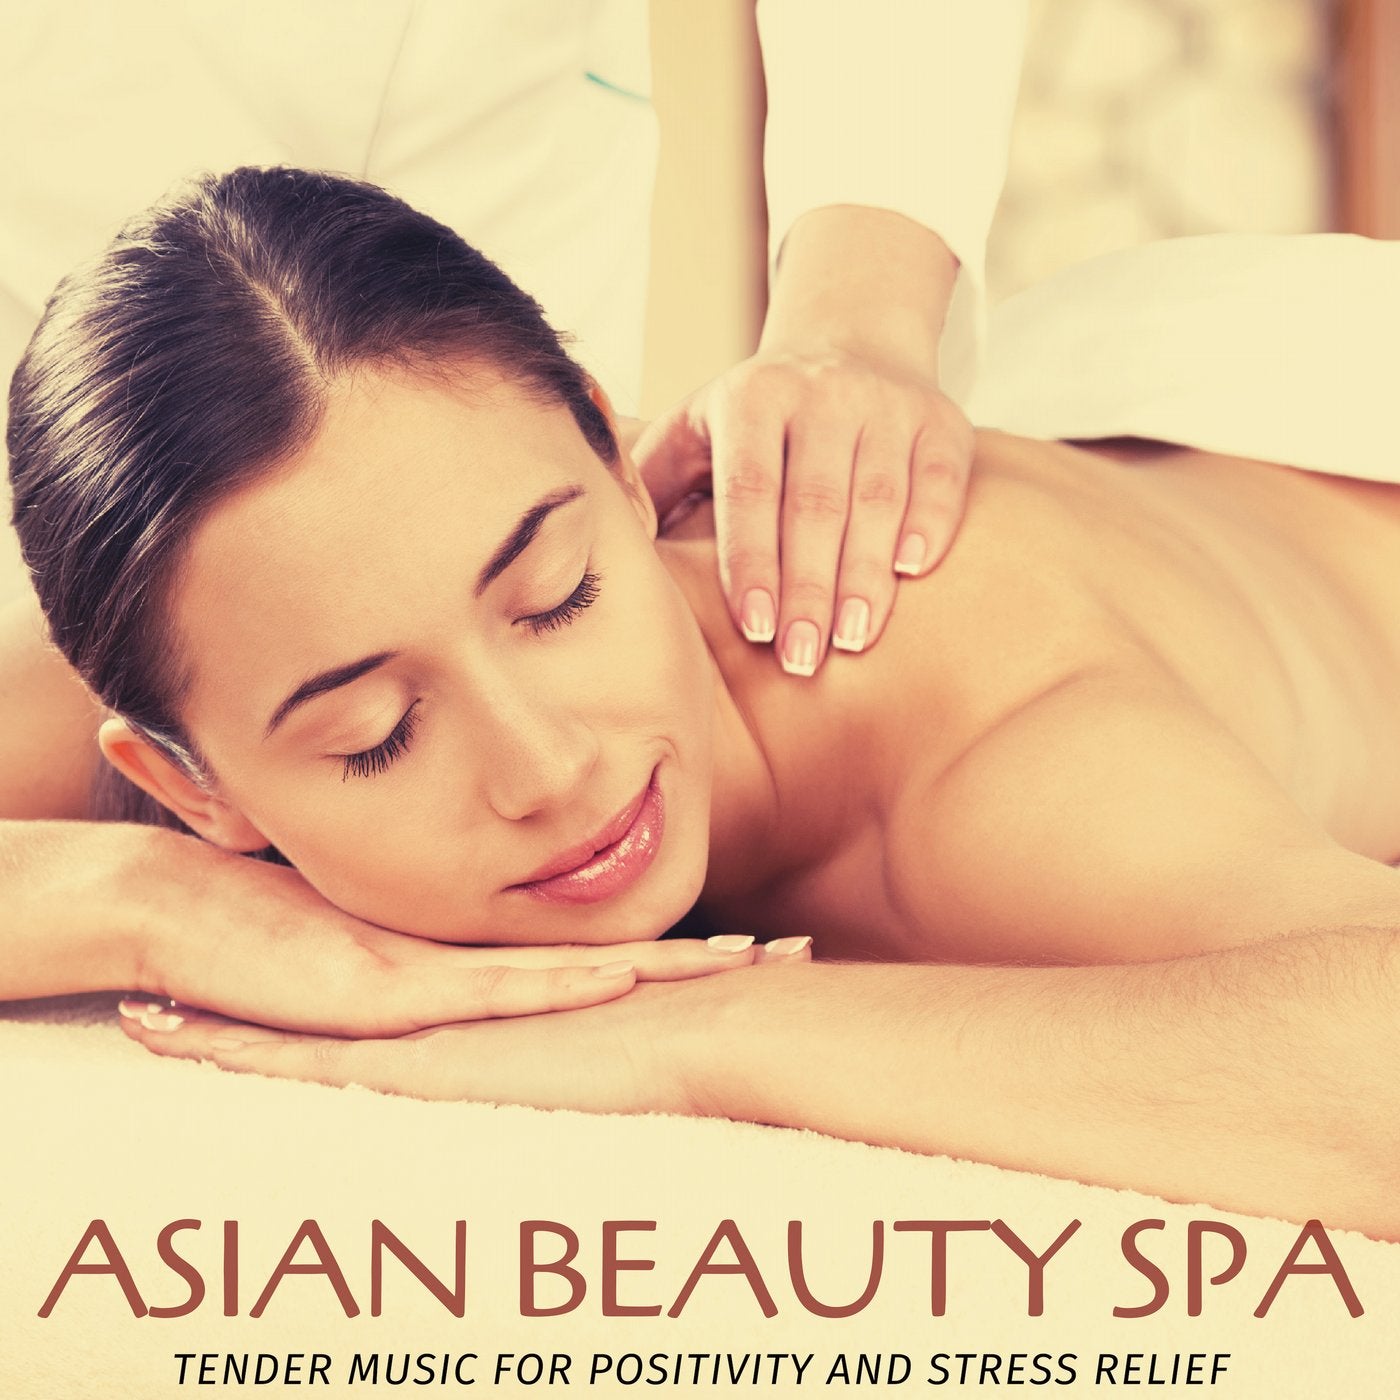 Asian Beauty Spa - Tender Music For Positivity And Stress Relief